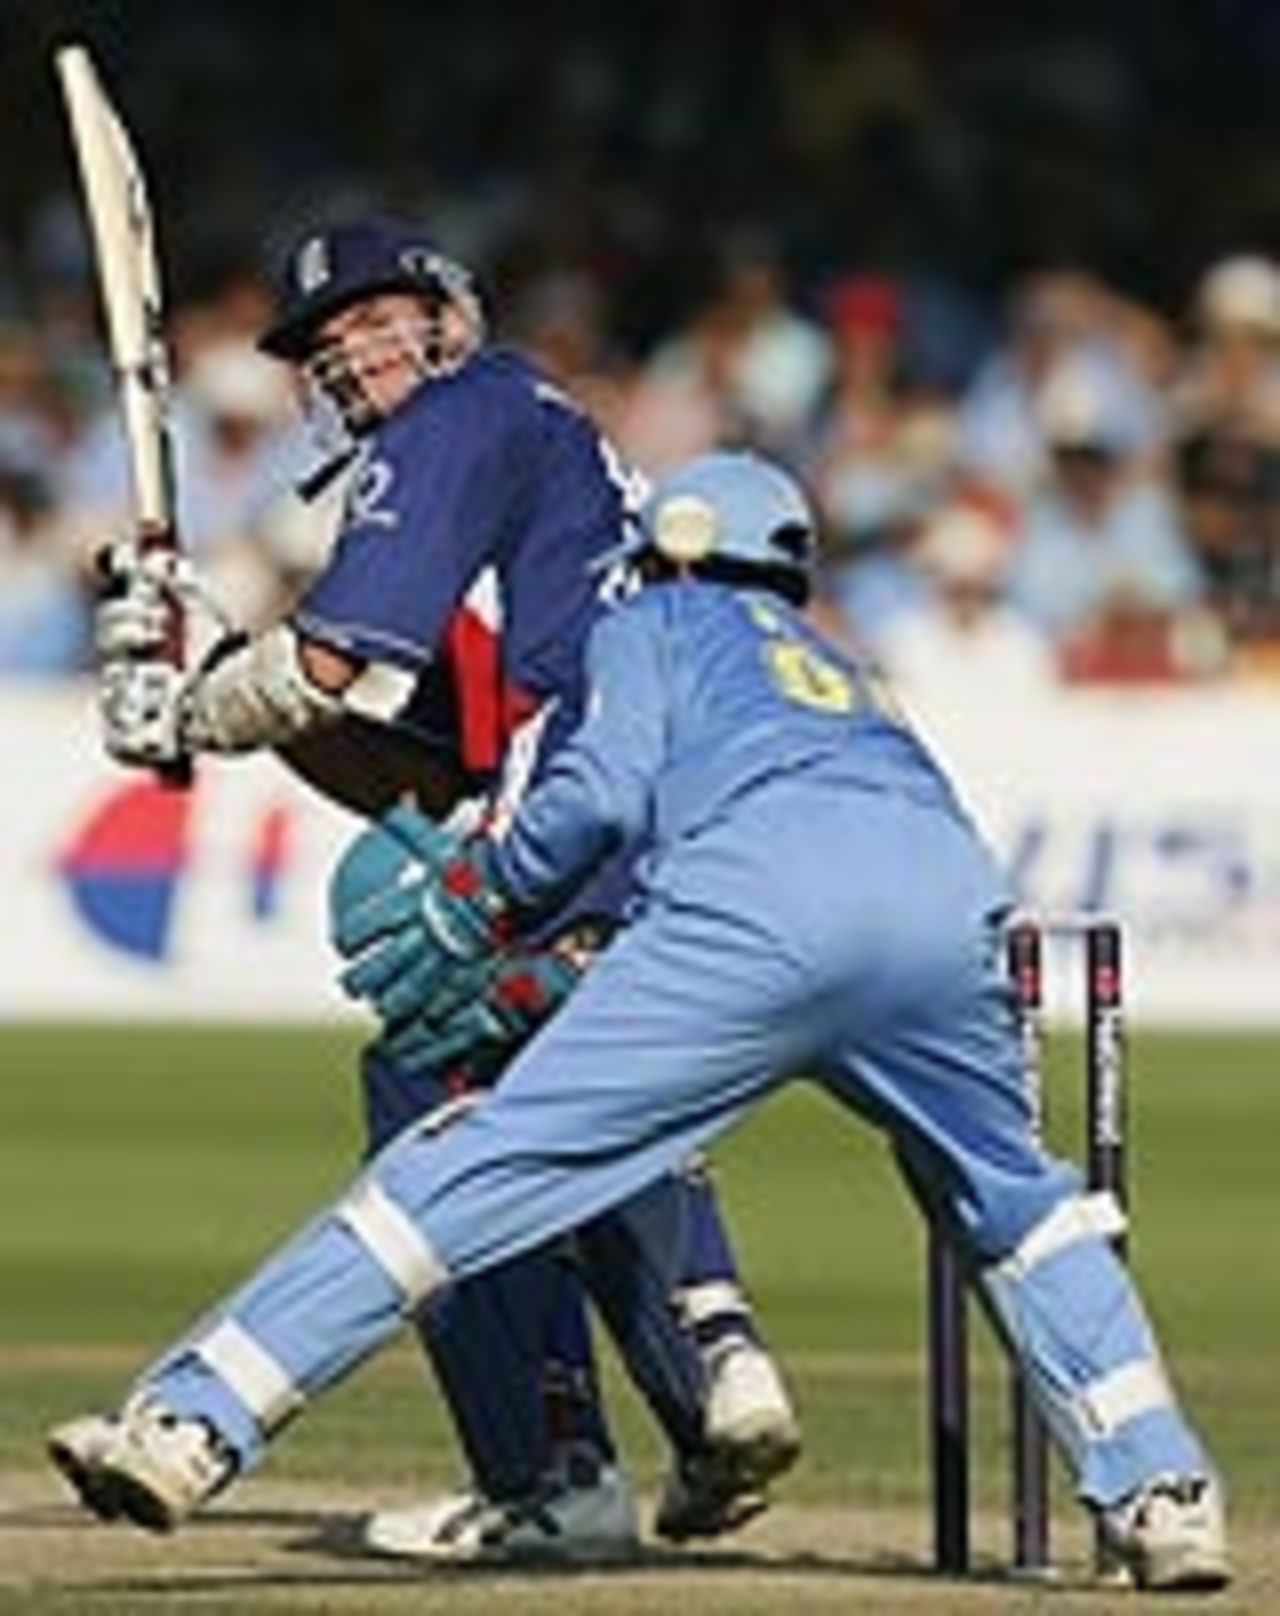 Michael Vaughan tickles another single as England inch their way back into contention at Lord's, England v India, 3rd ODI, NatWest Challenge, September 5 2004